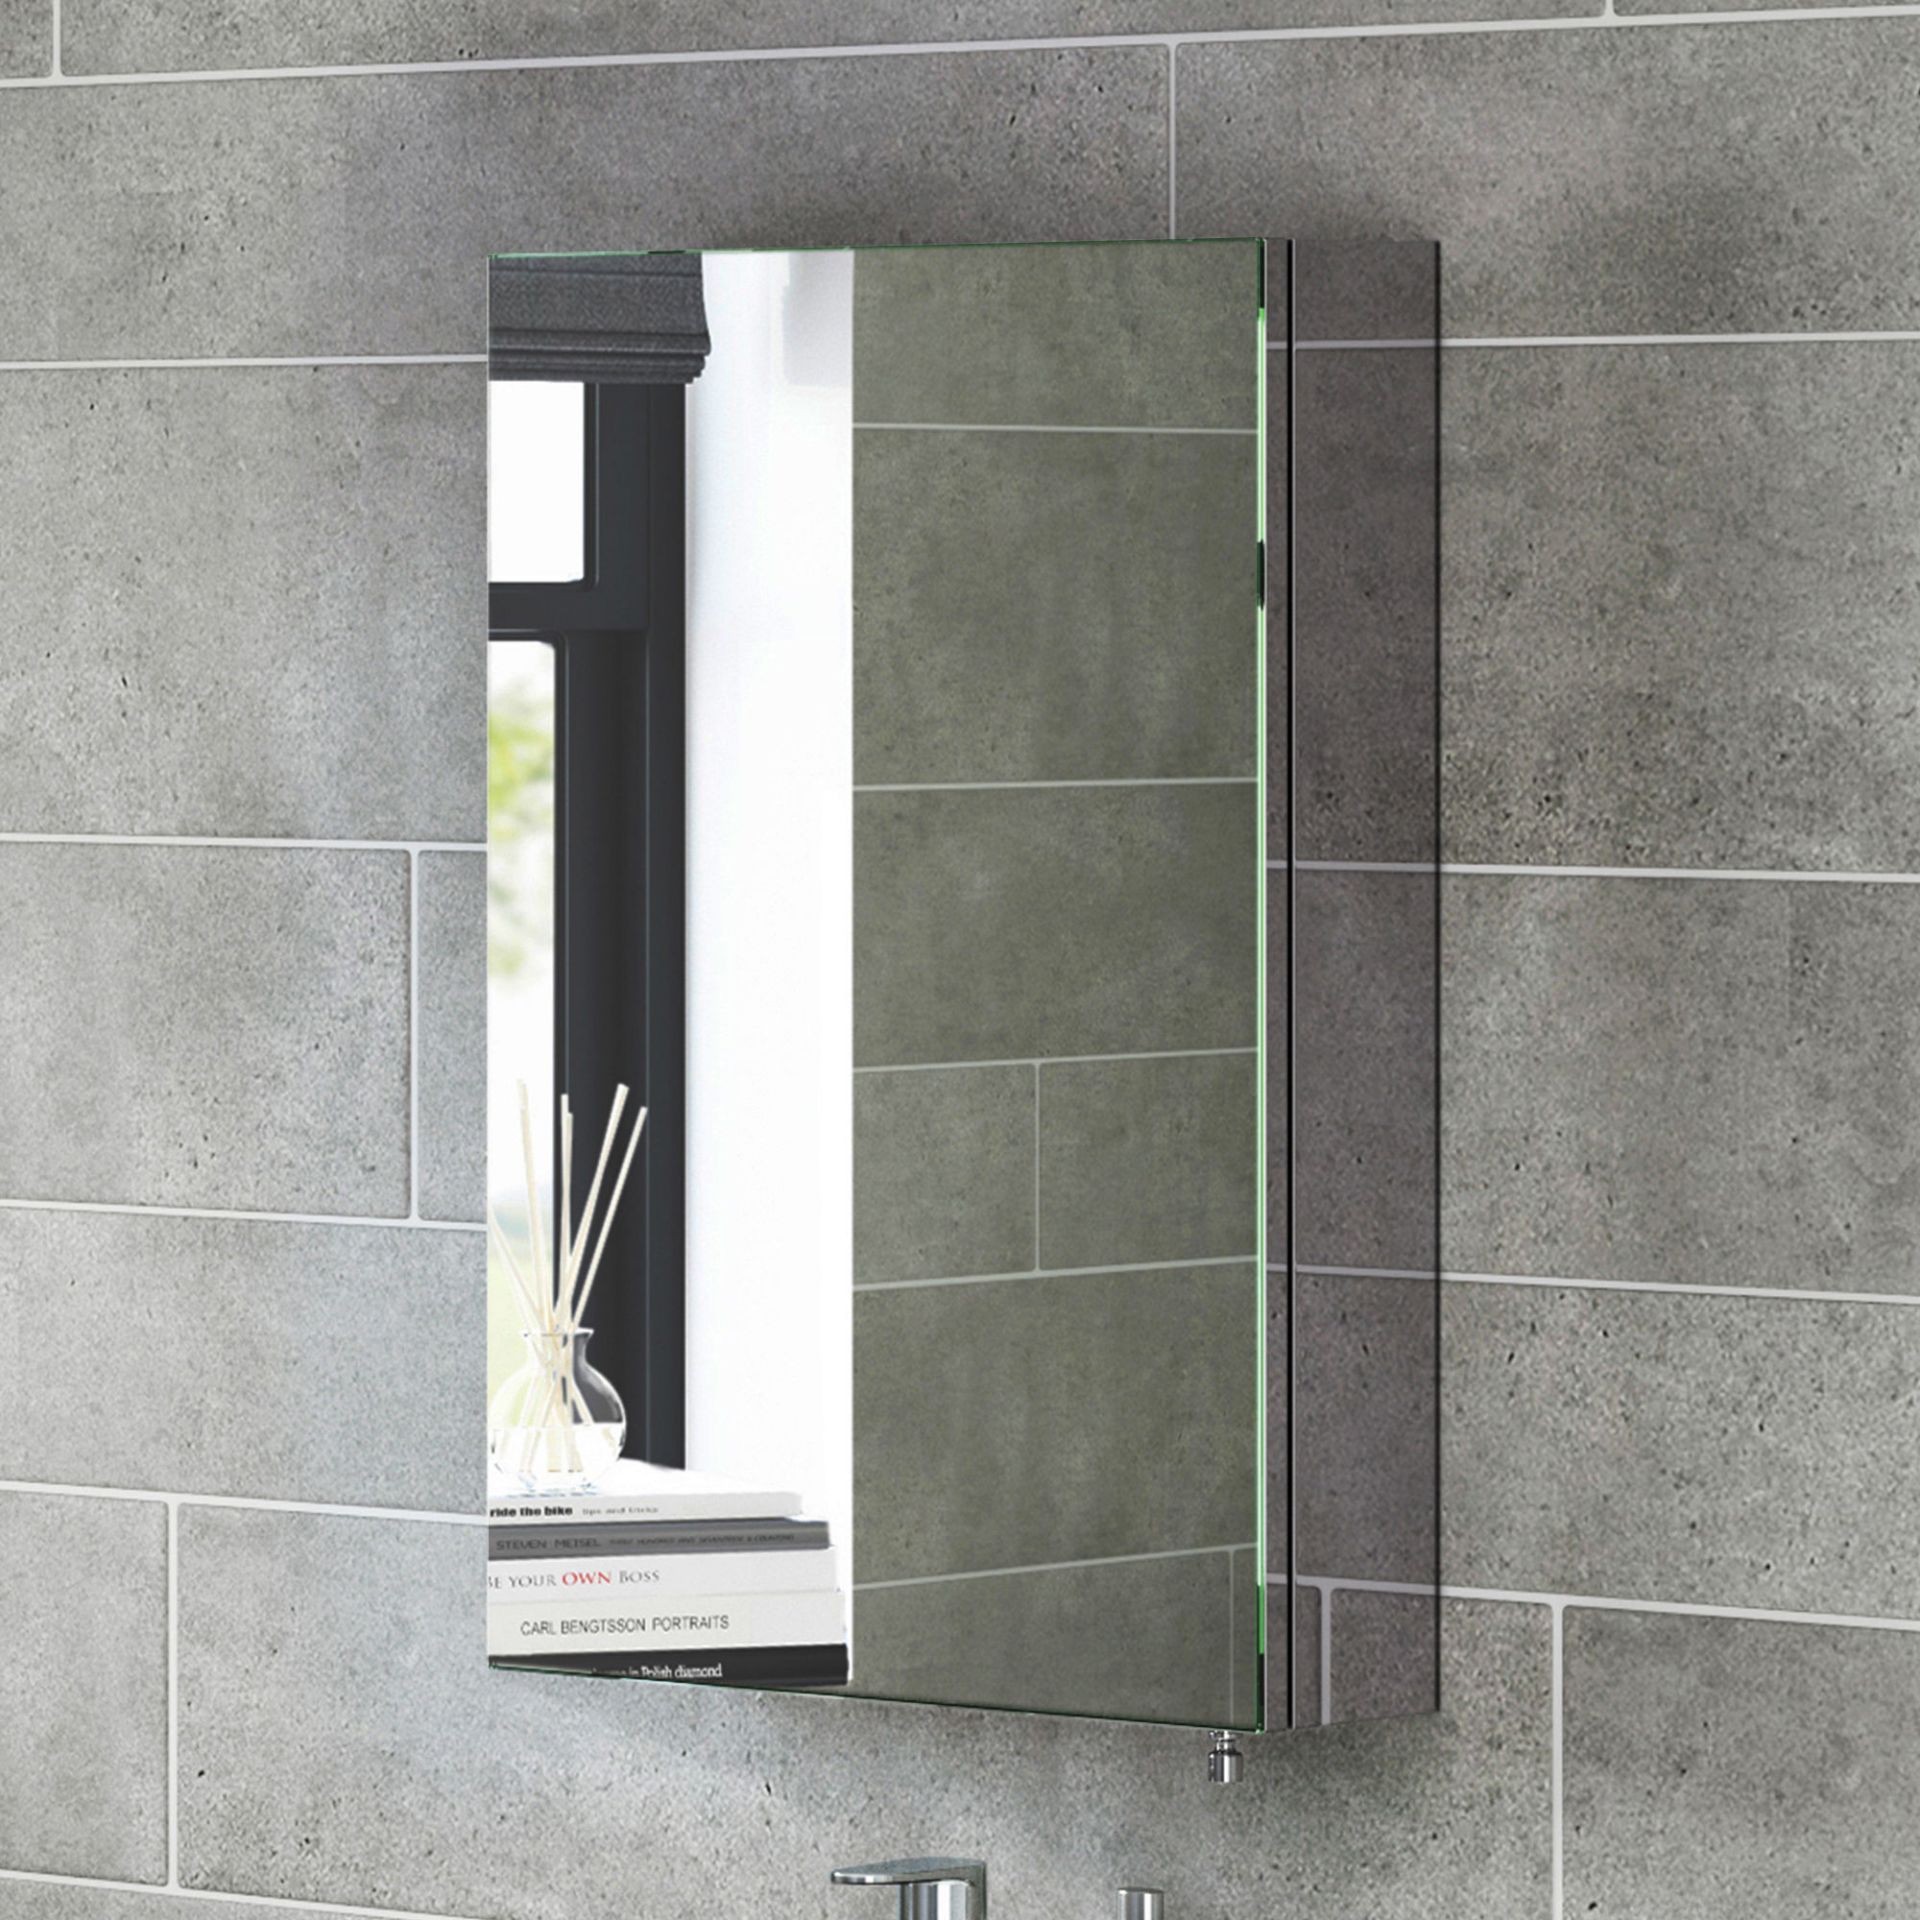 (CS42) 400x600mm Liberty Stainless Steel Single Door Mirror Cabinet. RRP £199.99. Made from high-